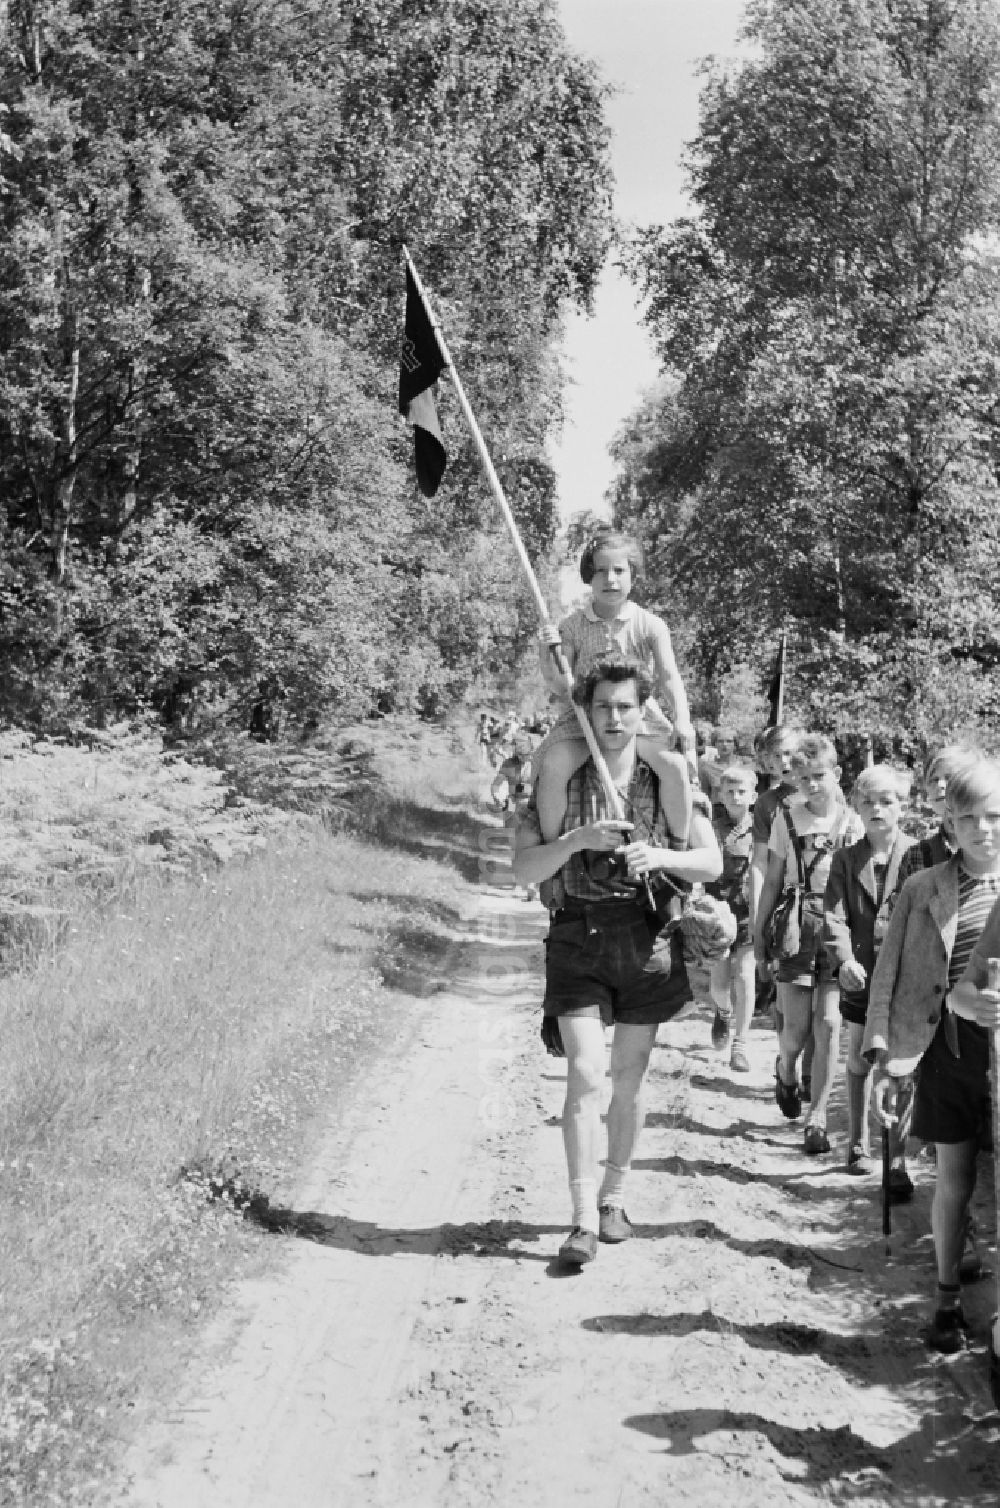 GDR photo archive: Prerow - Group of children and teenagers hiking with the pennant youth organization's pennant in Prerow in the state Mecklenburg-Western Pomerania on the territory of the former GDR, German Democratic Republic